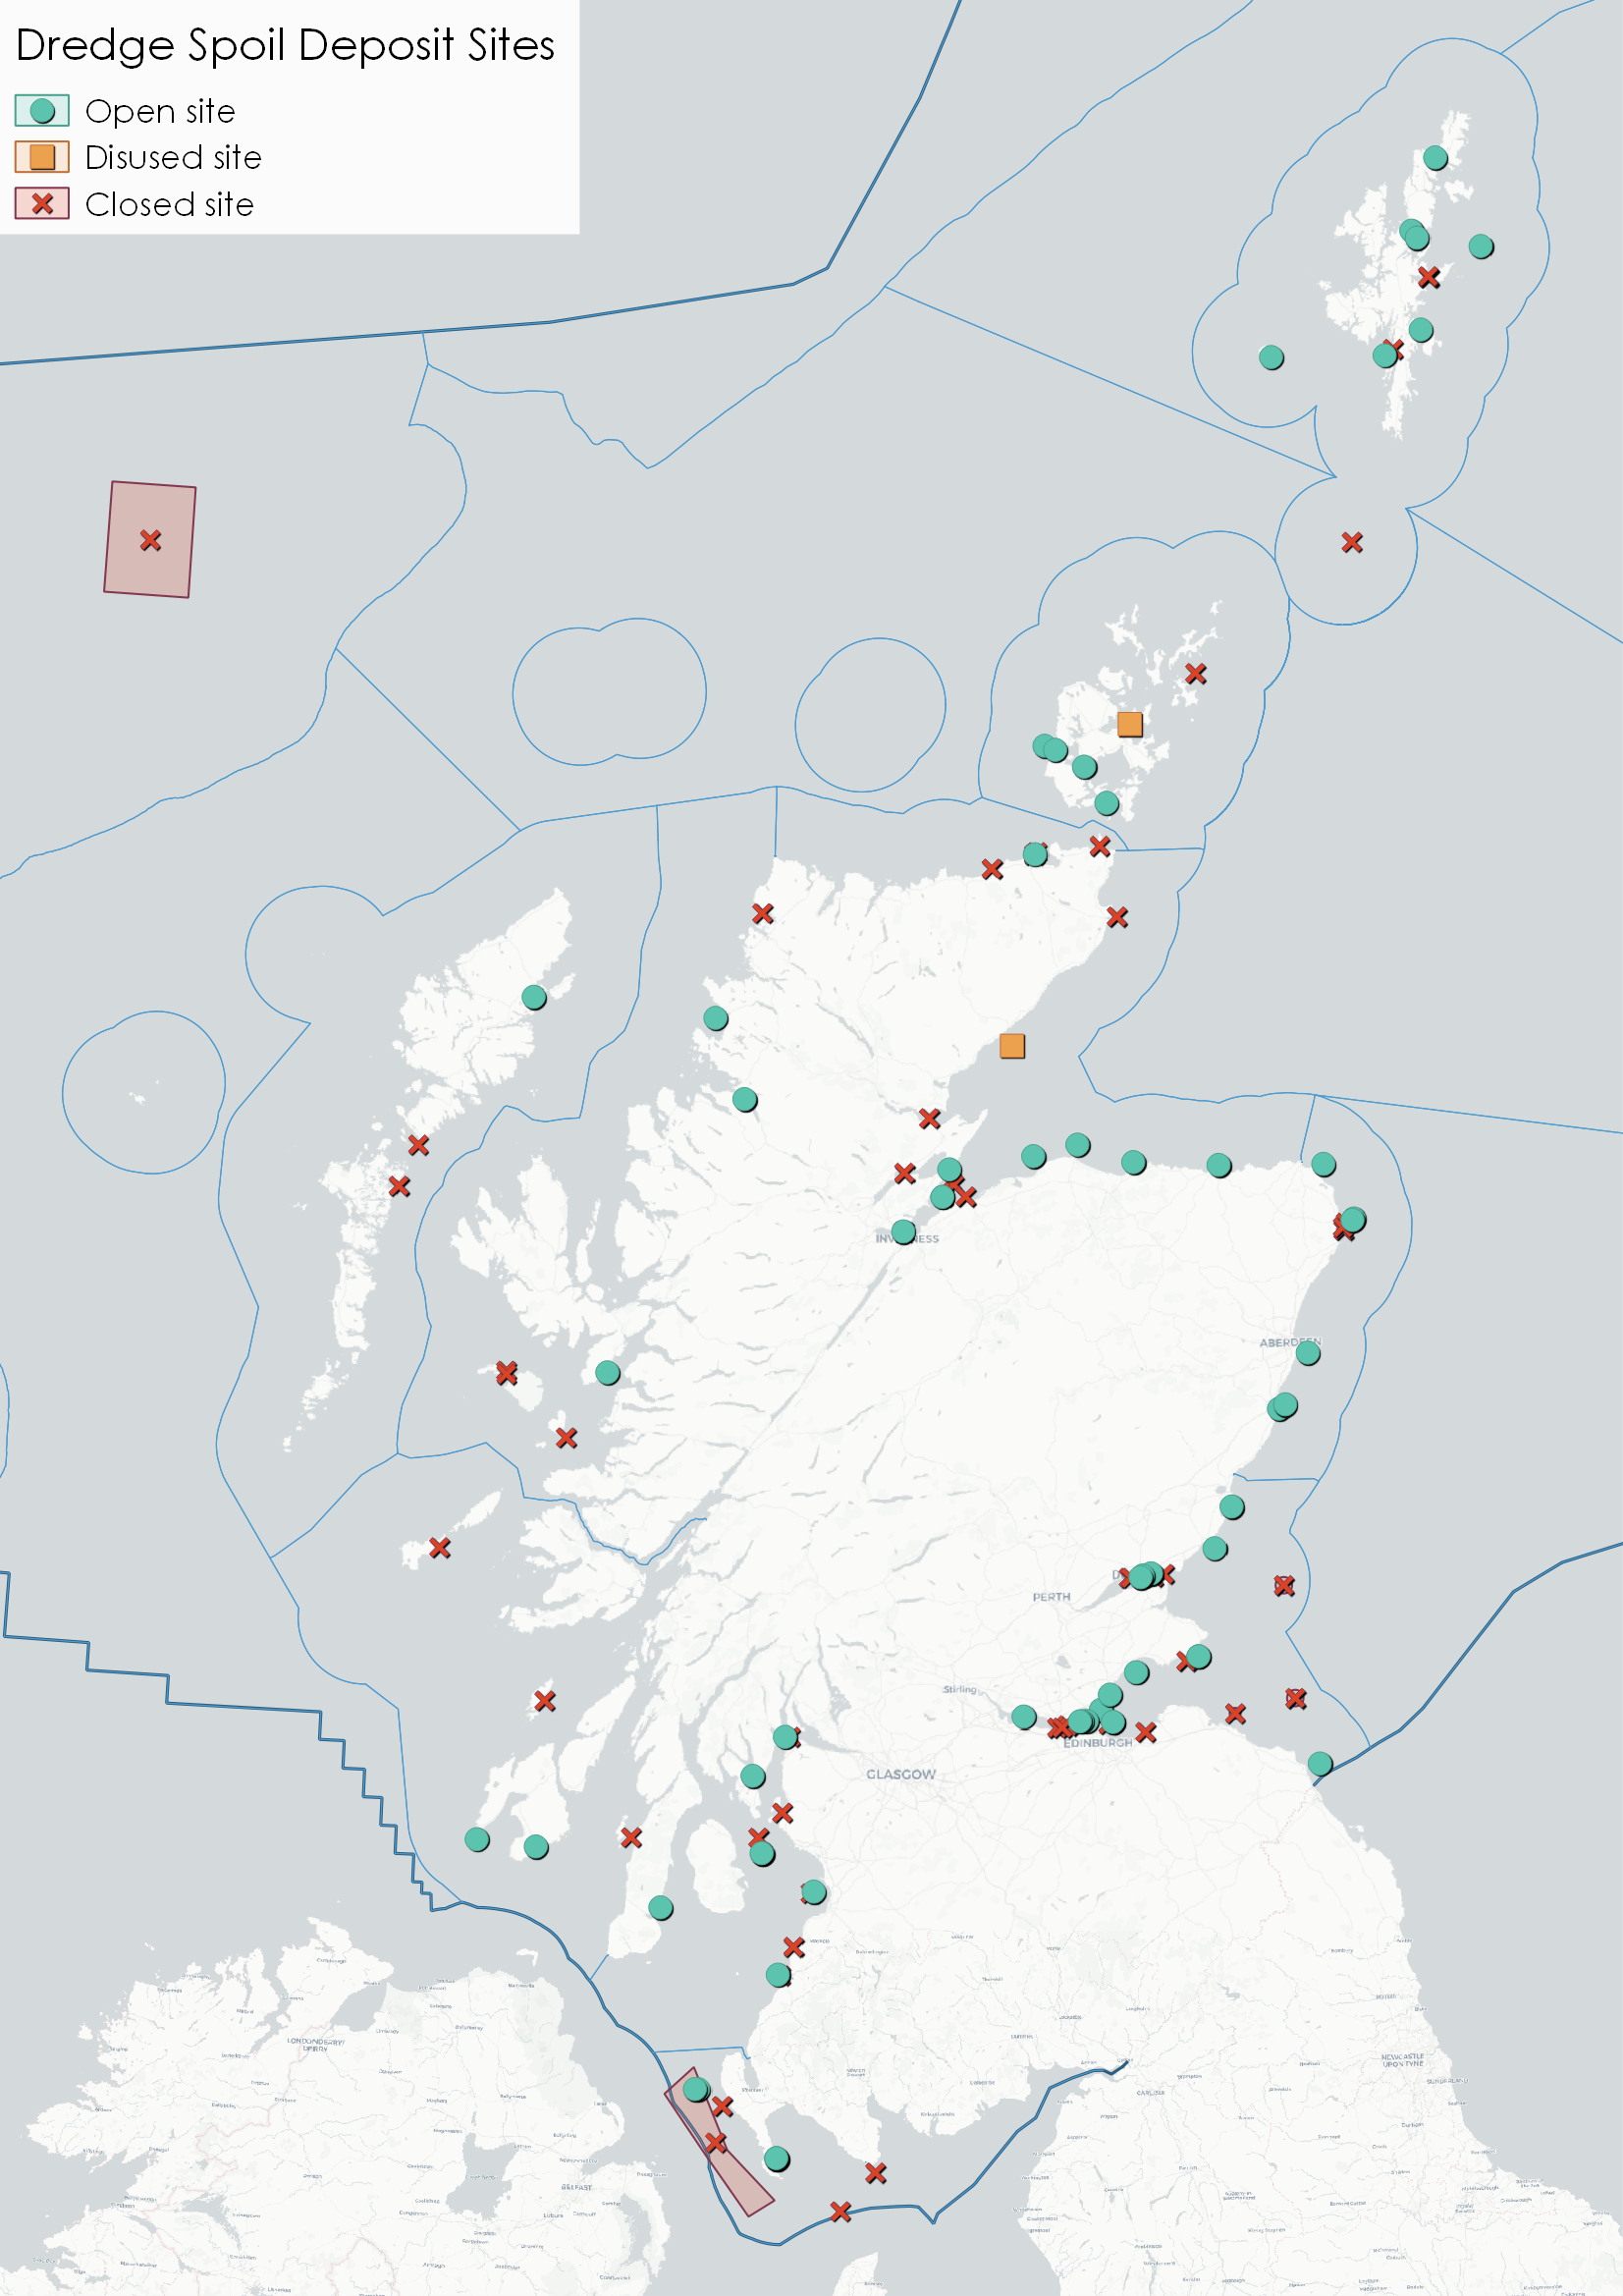 Figure 2: Map of open, closed and disused disposal sites. Source: Marine Scotland.